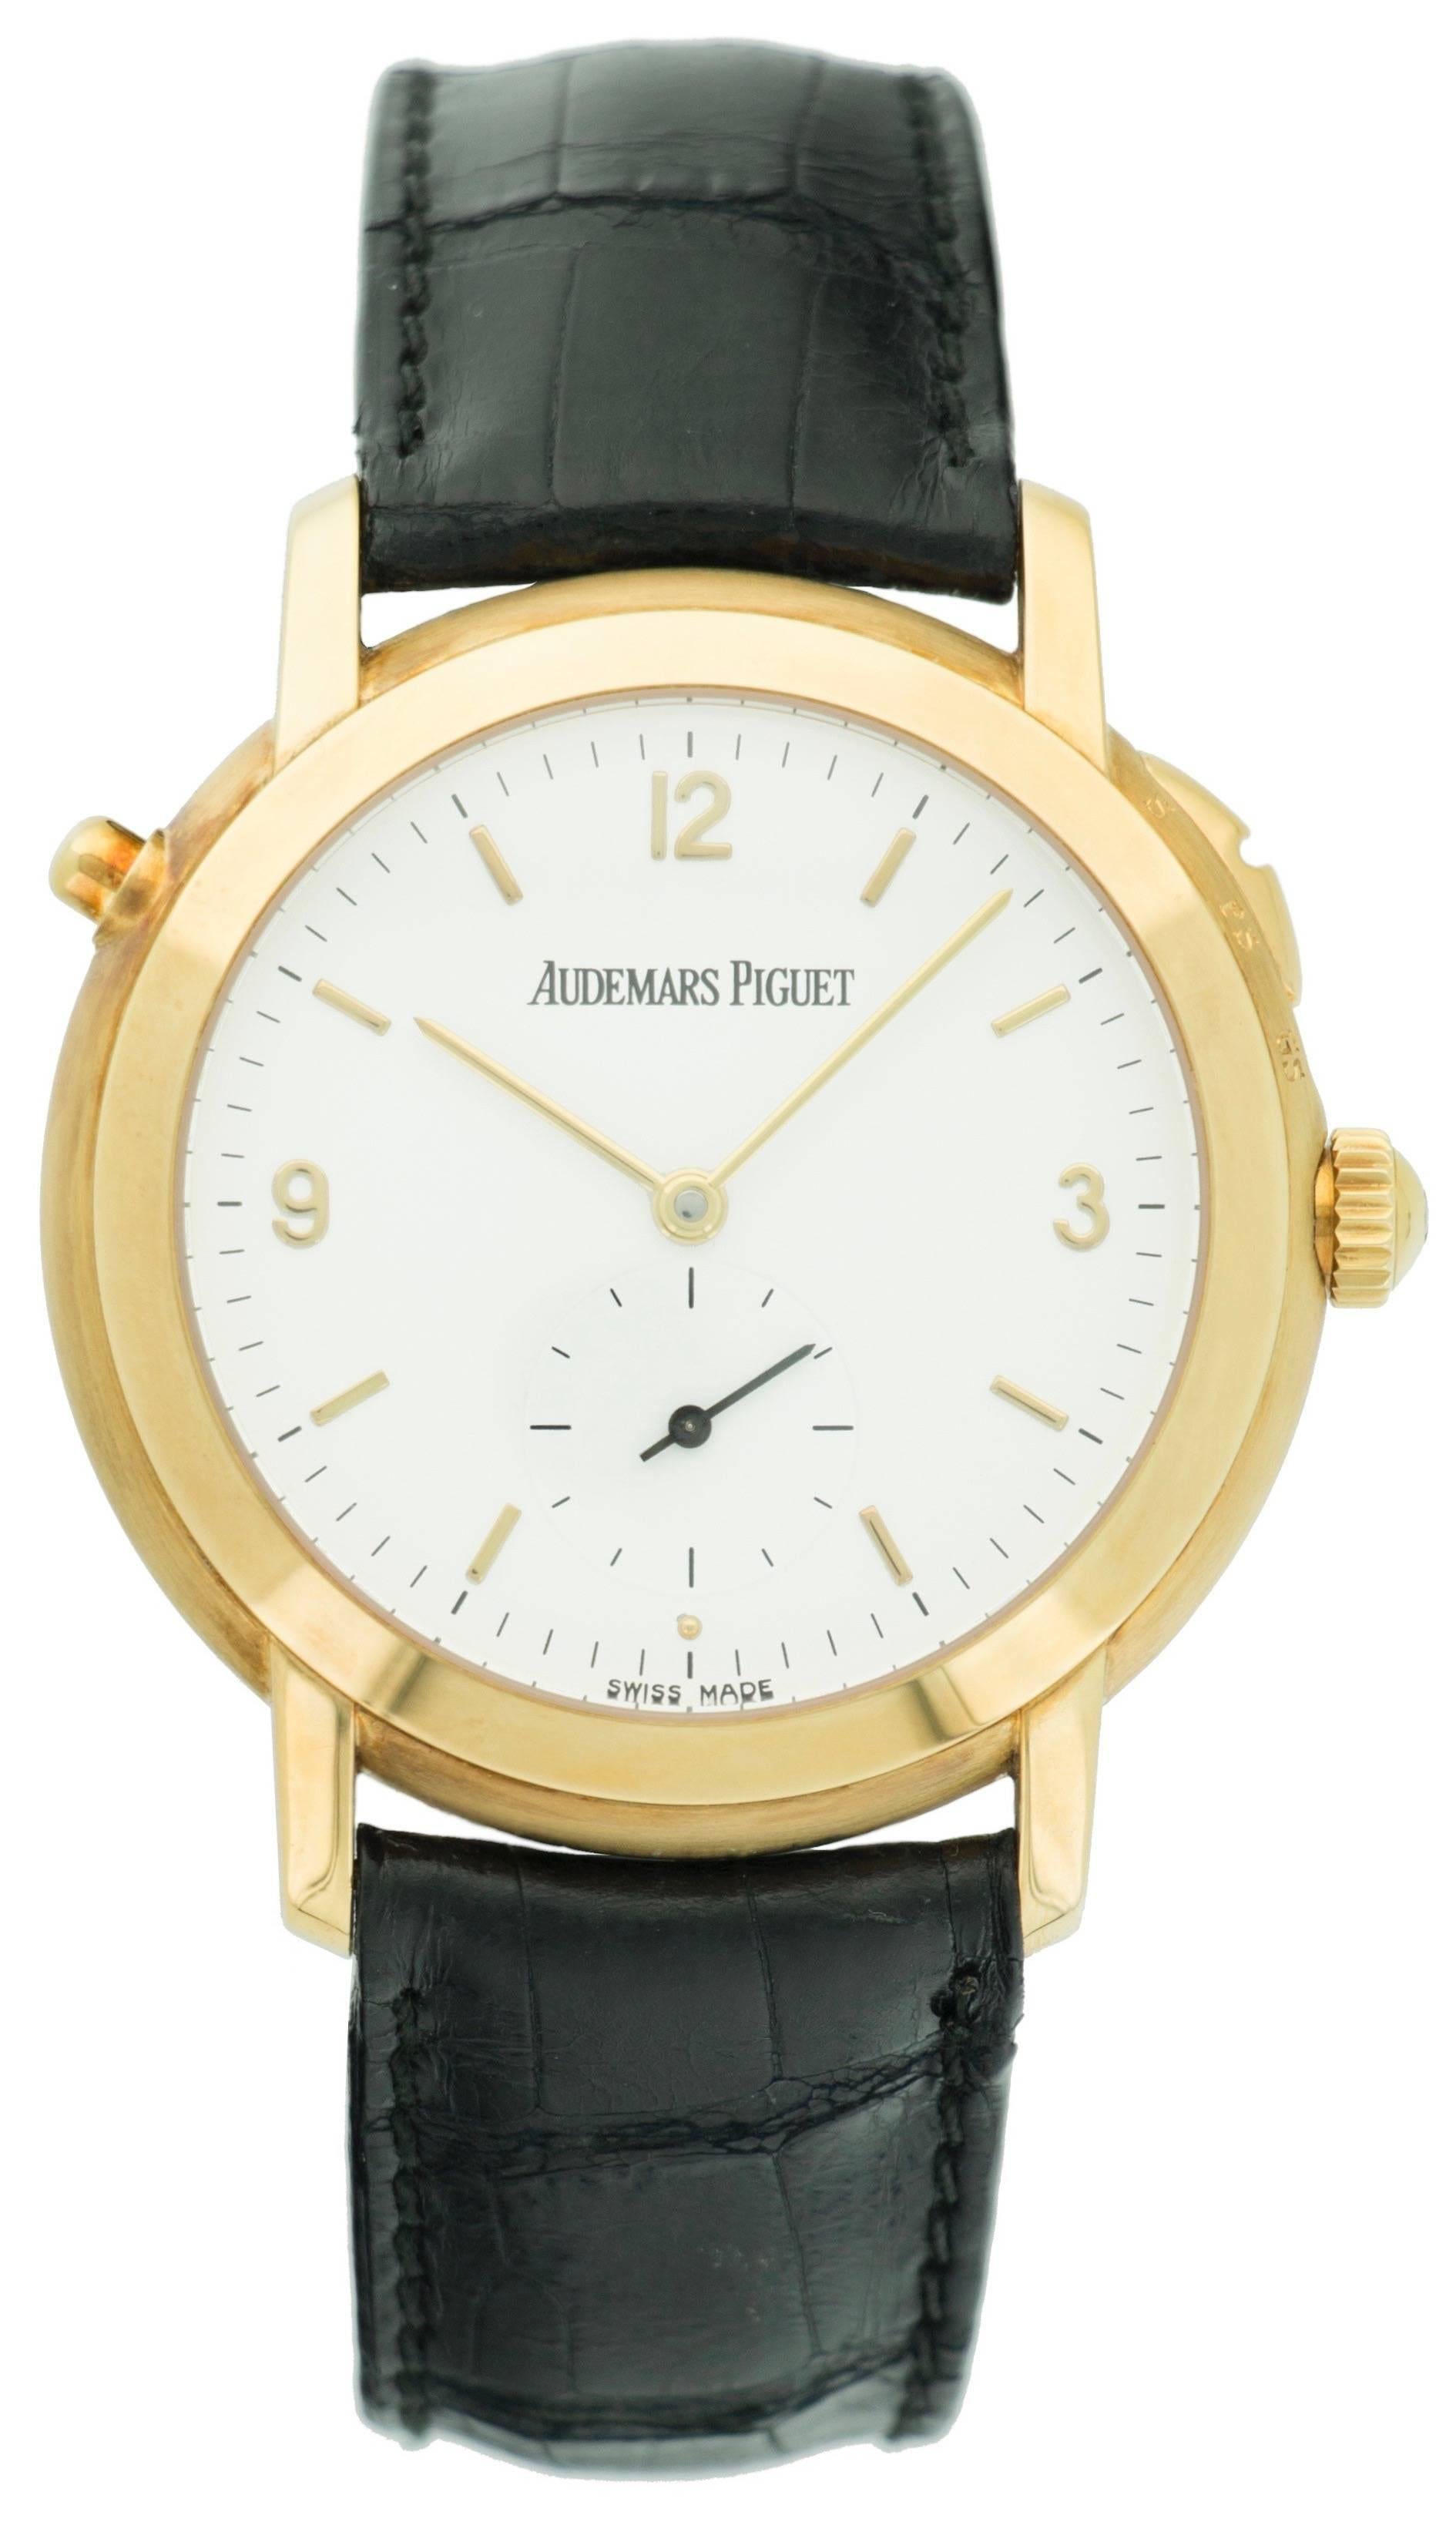 This beautiful Audemars Piguet Petite Sonnerie Minute Repeater is as strrrrrrrrrr o'clock is pulled, the watch lets of a series of delightful bells ringing out the exact time shown on the watch. This is a truly special pieces and very hard to come